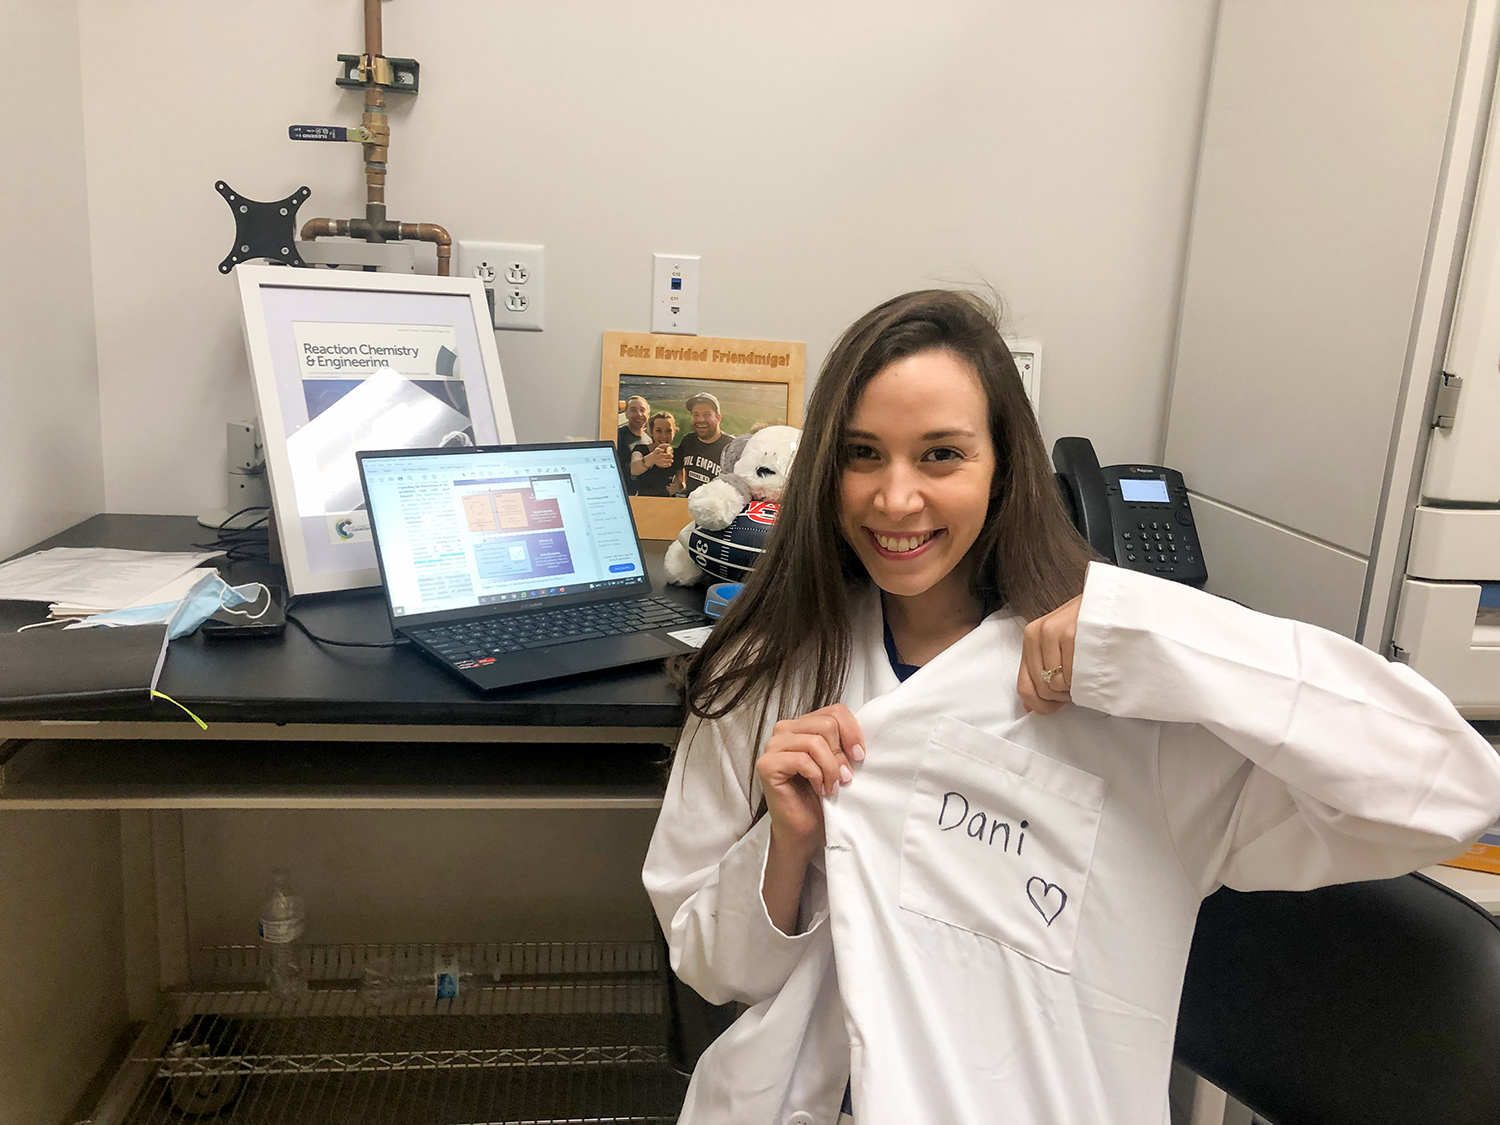 Daniela Blanco turns from a lab desk and computer and excitedly gestures to the chest of the white lab coat she wears. Where a name tag might usually be, the coat reads “Dani” handwritten in marker with a large heart hand drawn below.